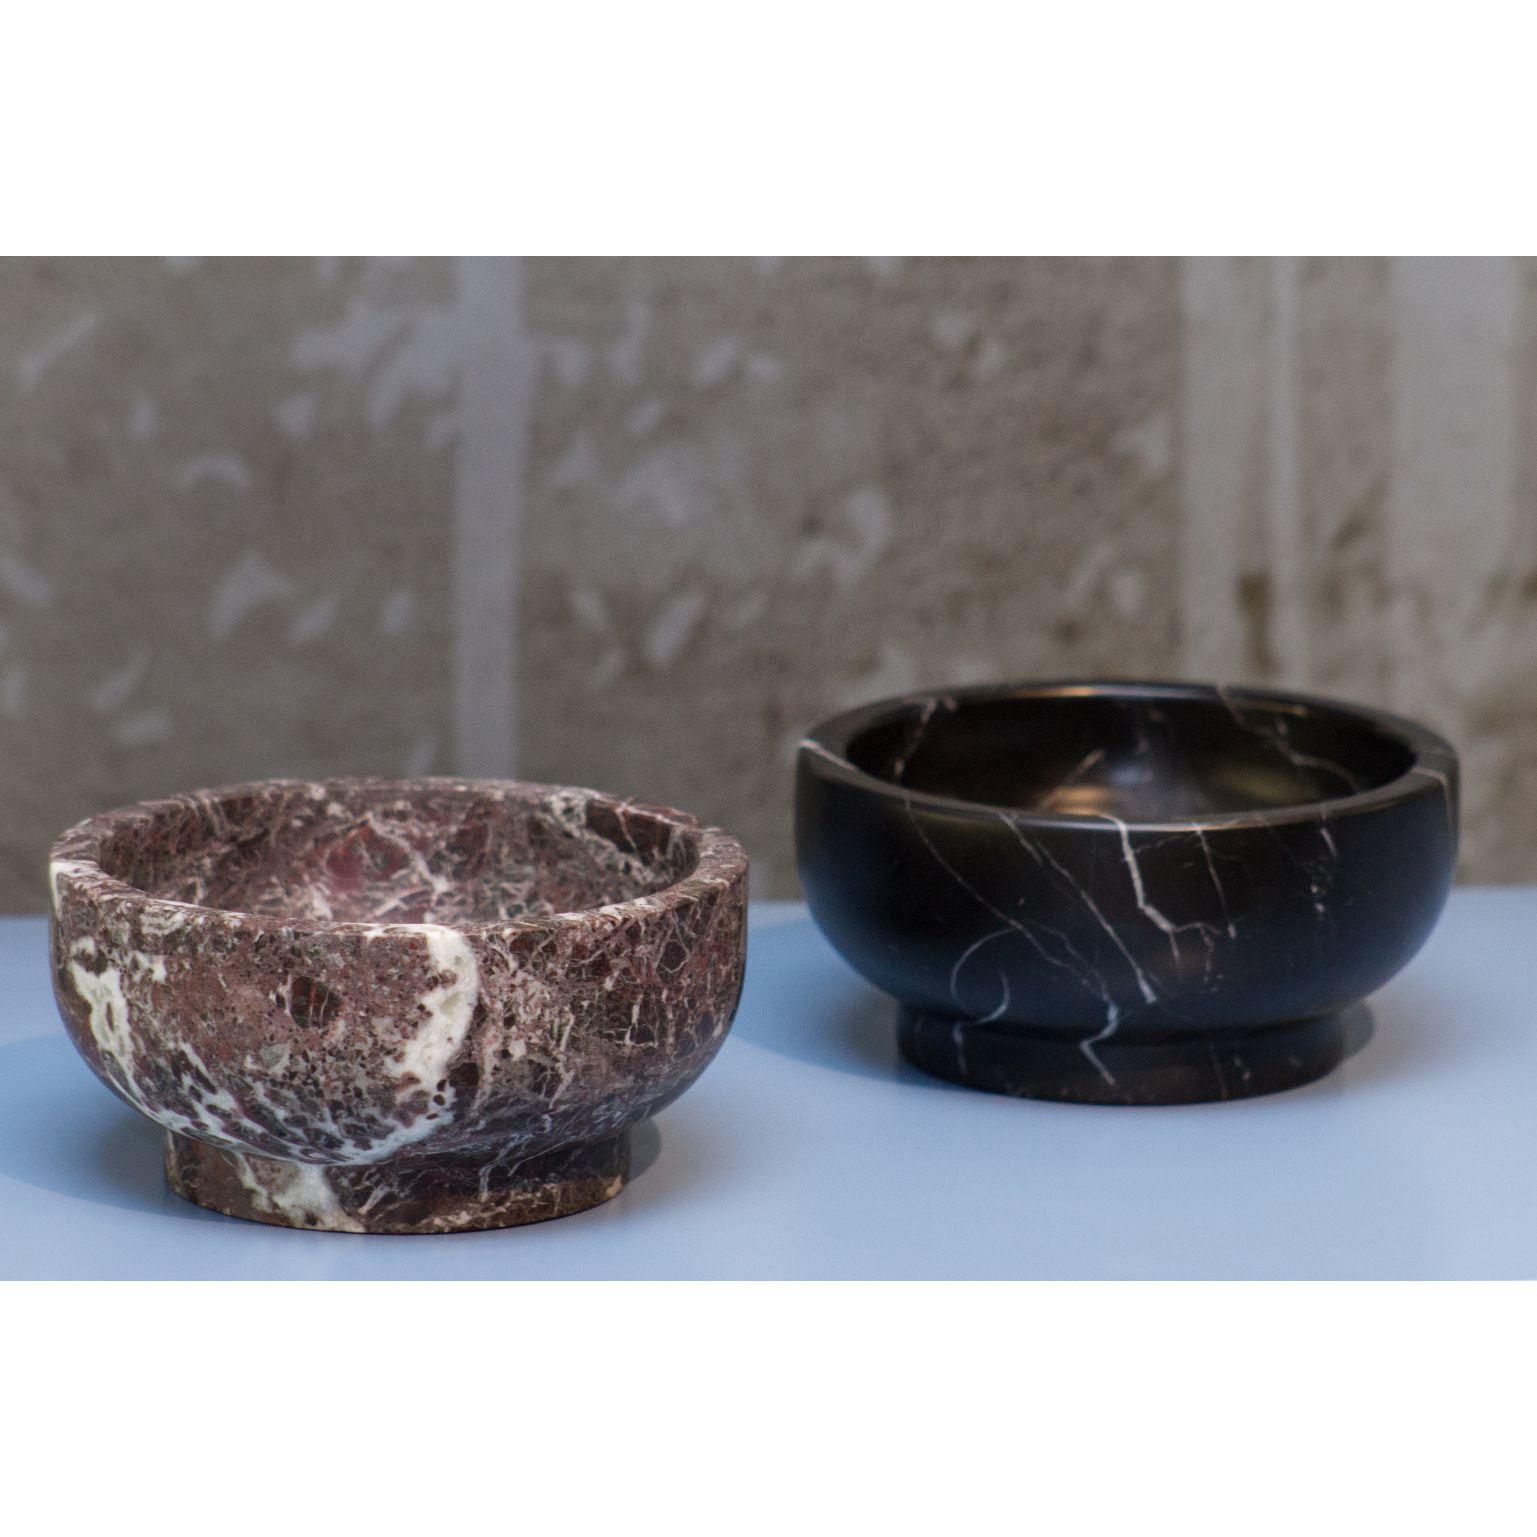 A set of 2 memory bowls - black & red by Cristoforo Trapani
Magnolia table collection
Dimensions: 17 x 8.5 cm
Materials: Rosso Levanto

Also available: Black (Nero Marquinia)

Contemporary chefs love to construct their culinary creations to